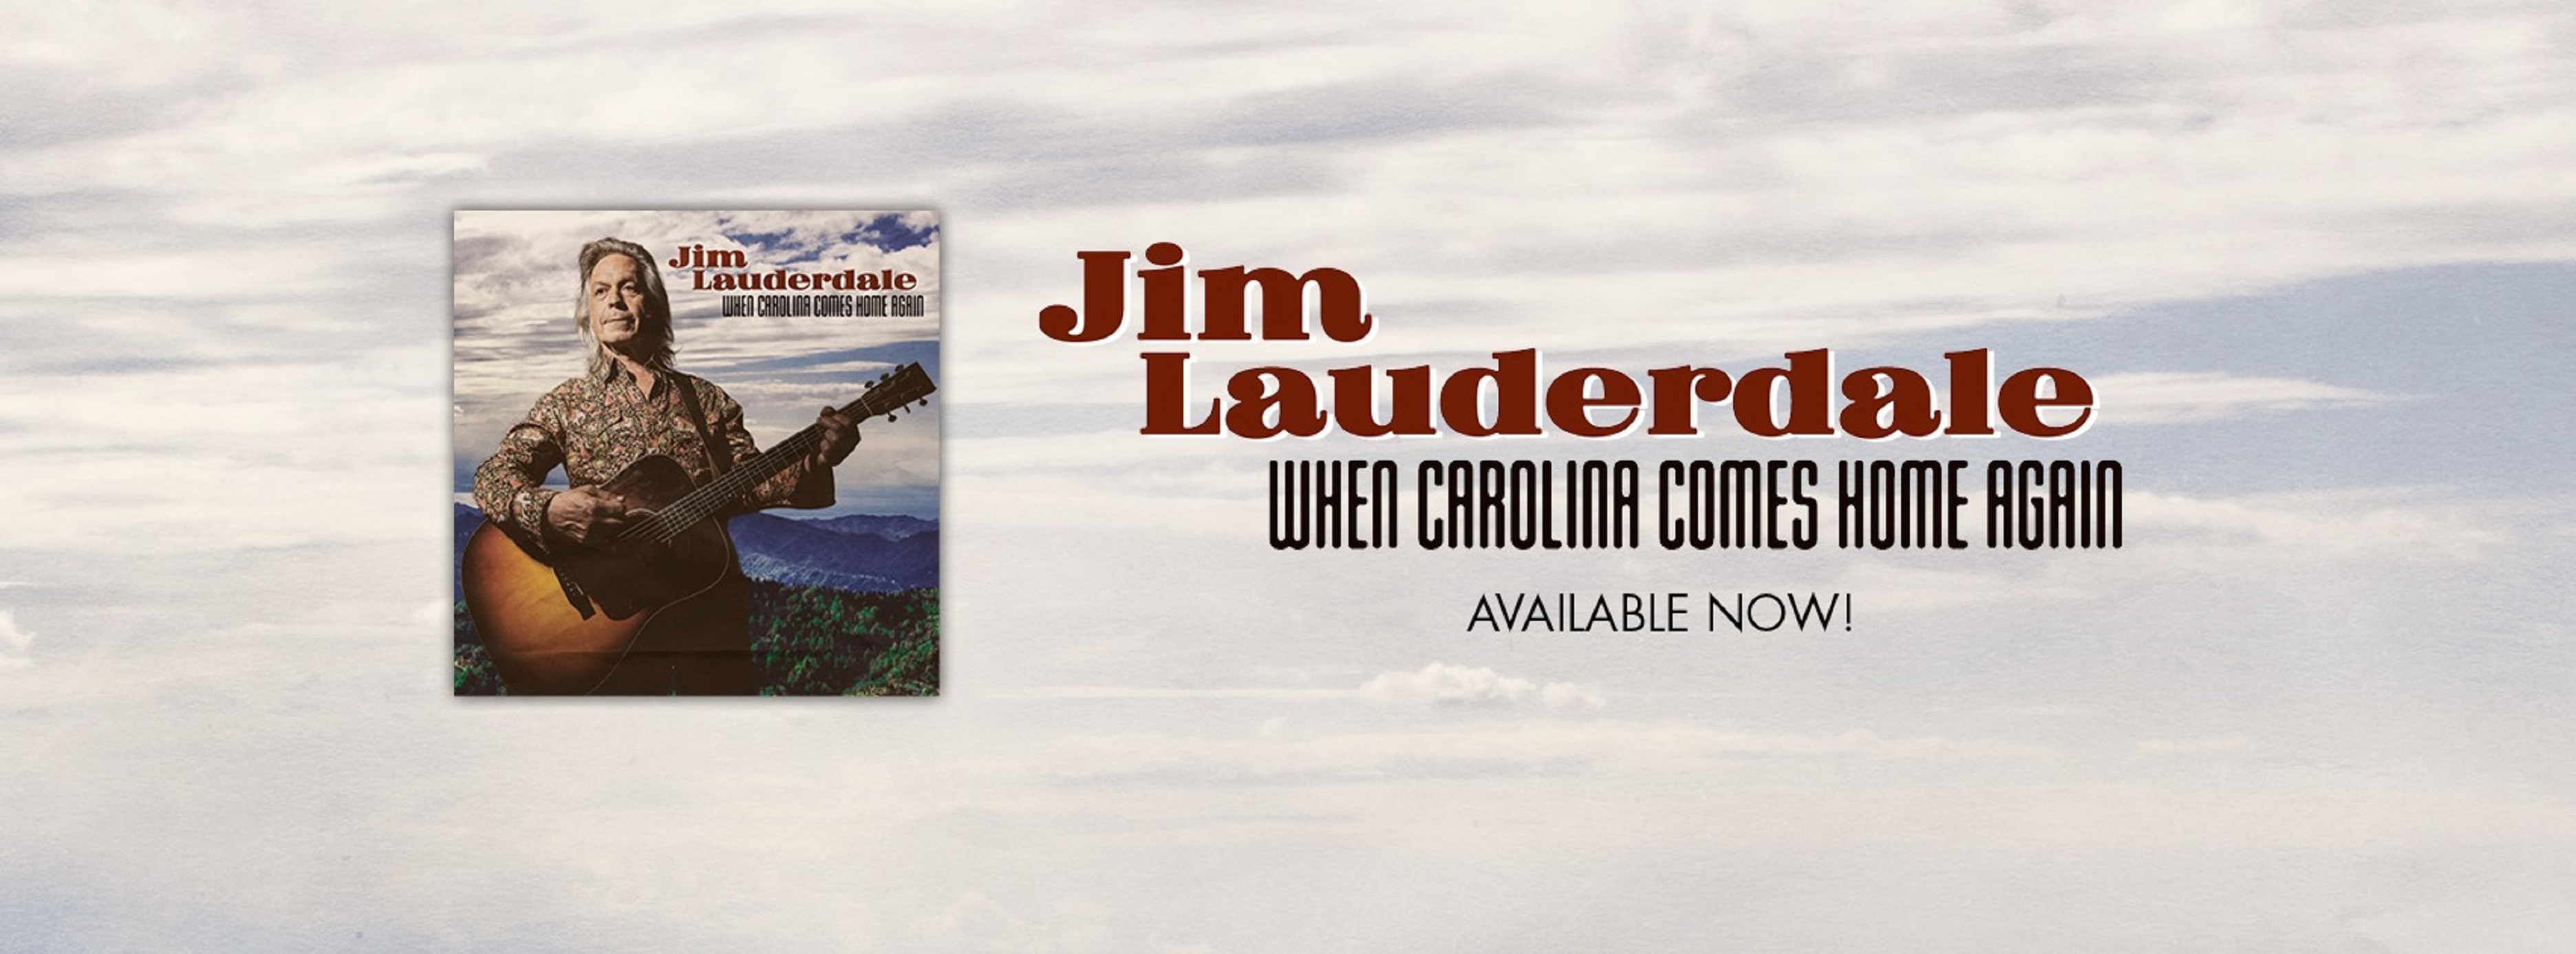 Jim Lauderdale’s 'When Carolina Comes Home Again' Out Now